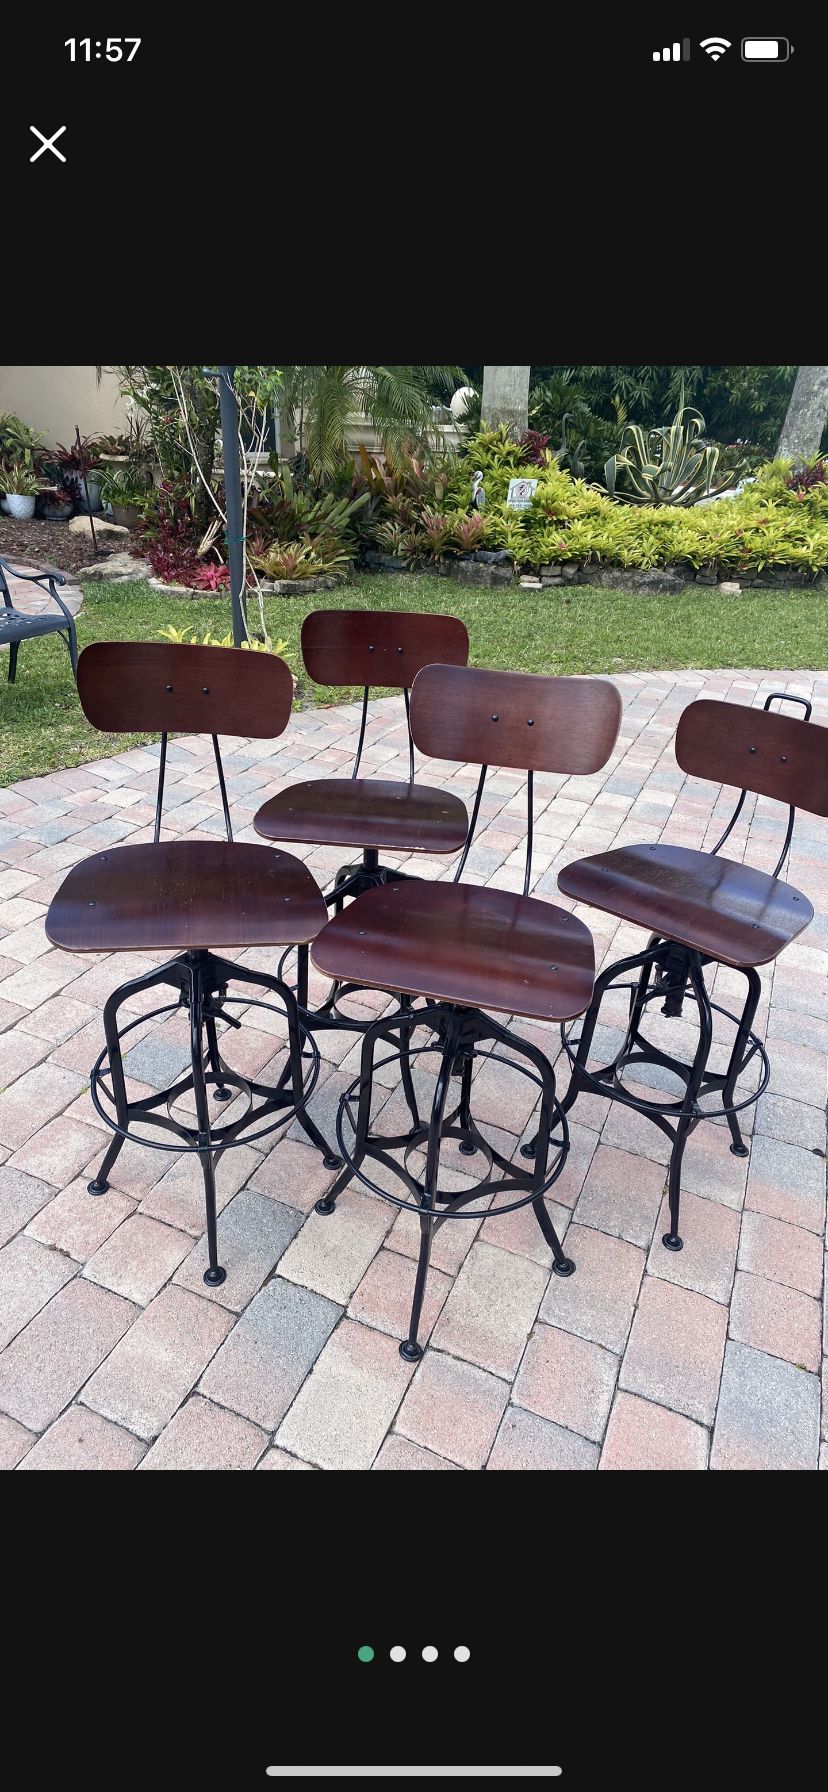 Four Wood And Iron Bar Stools Or Bar Chairs 